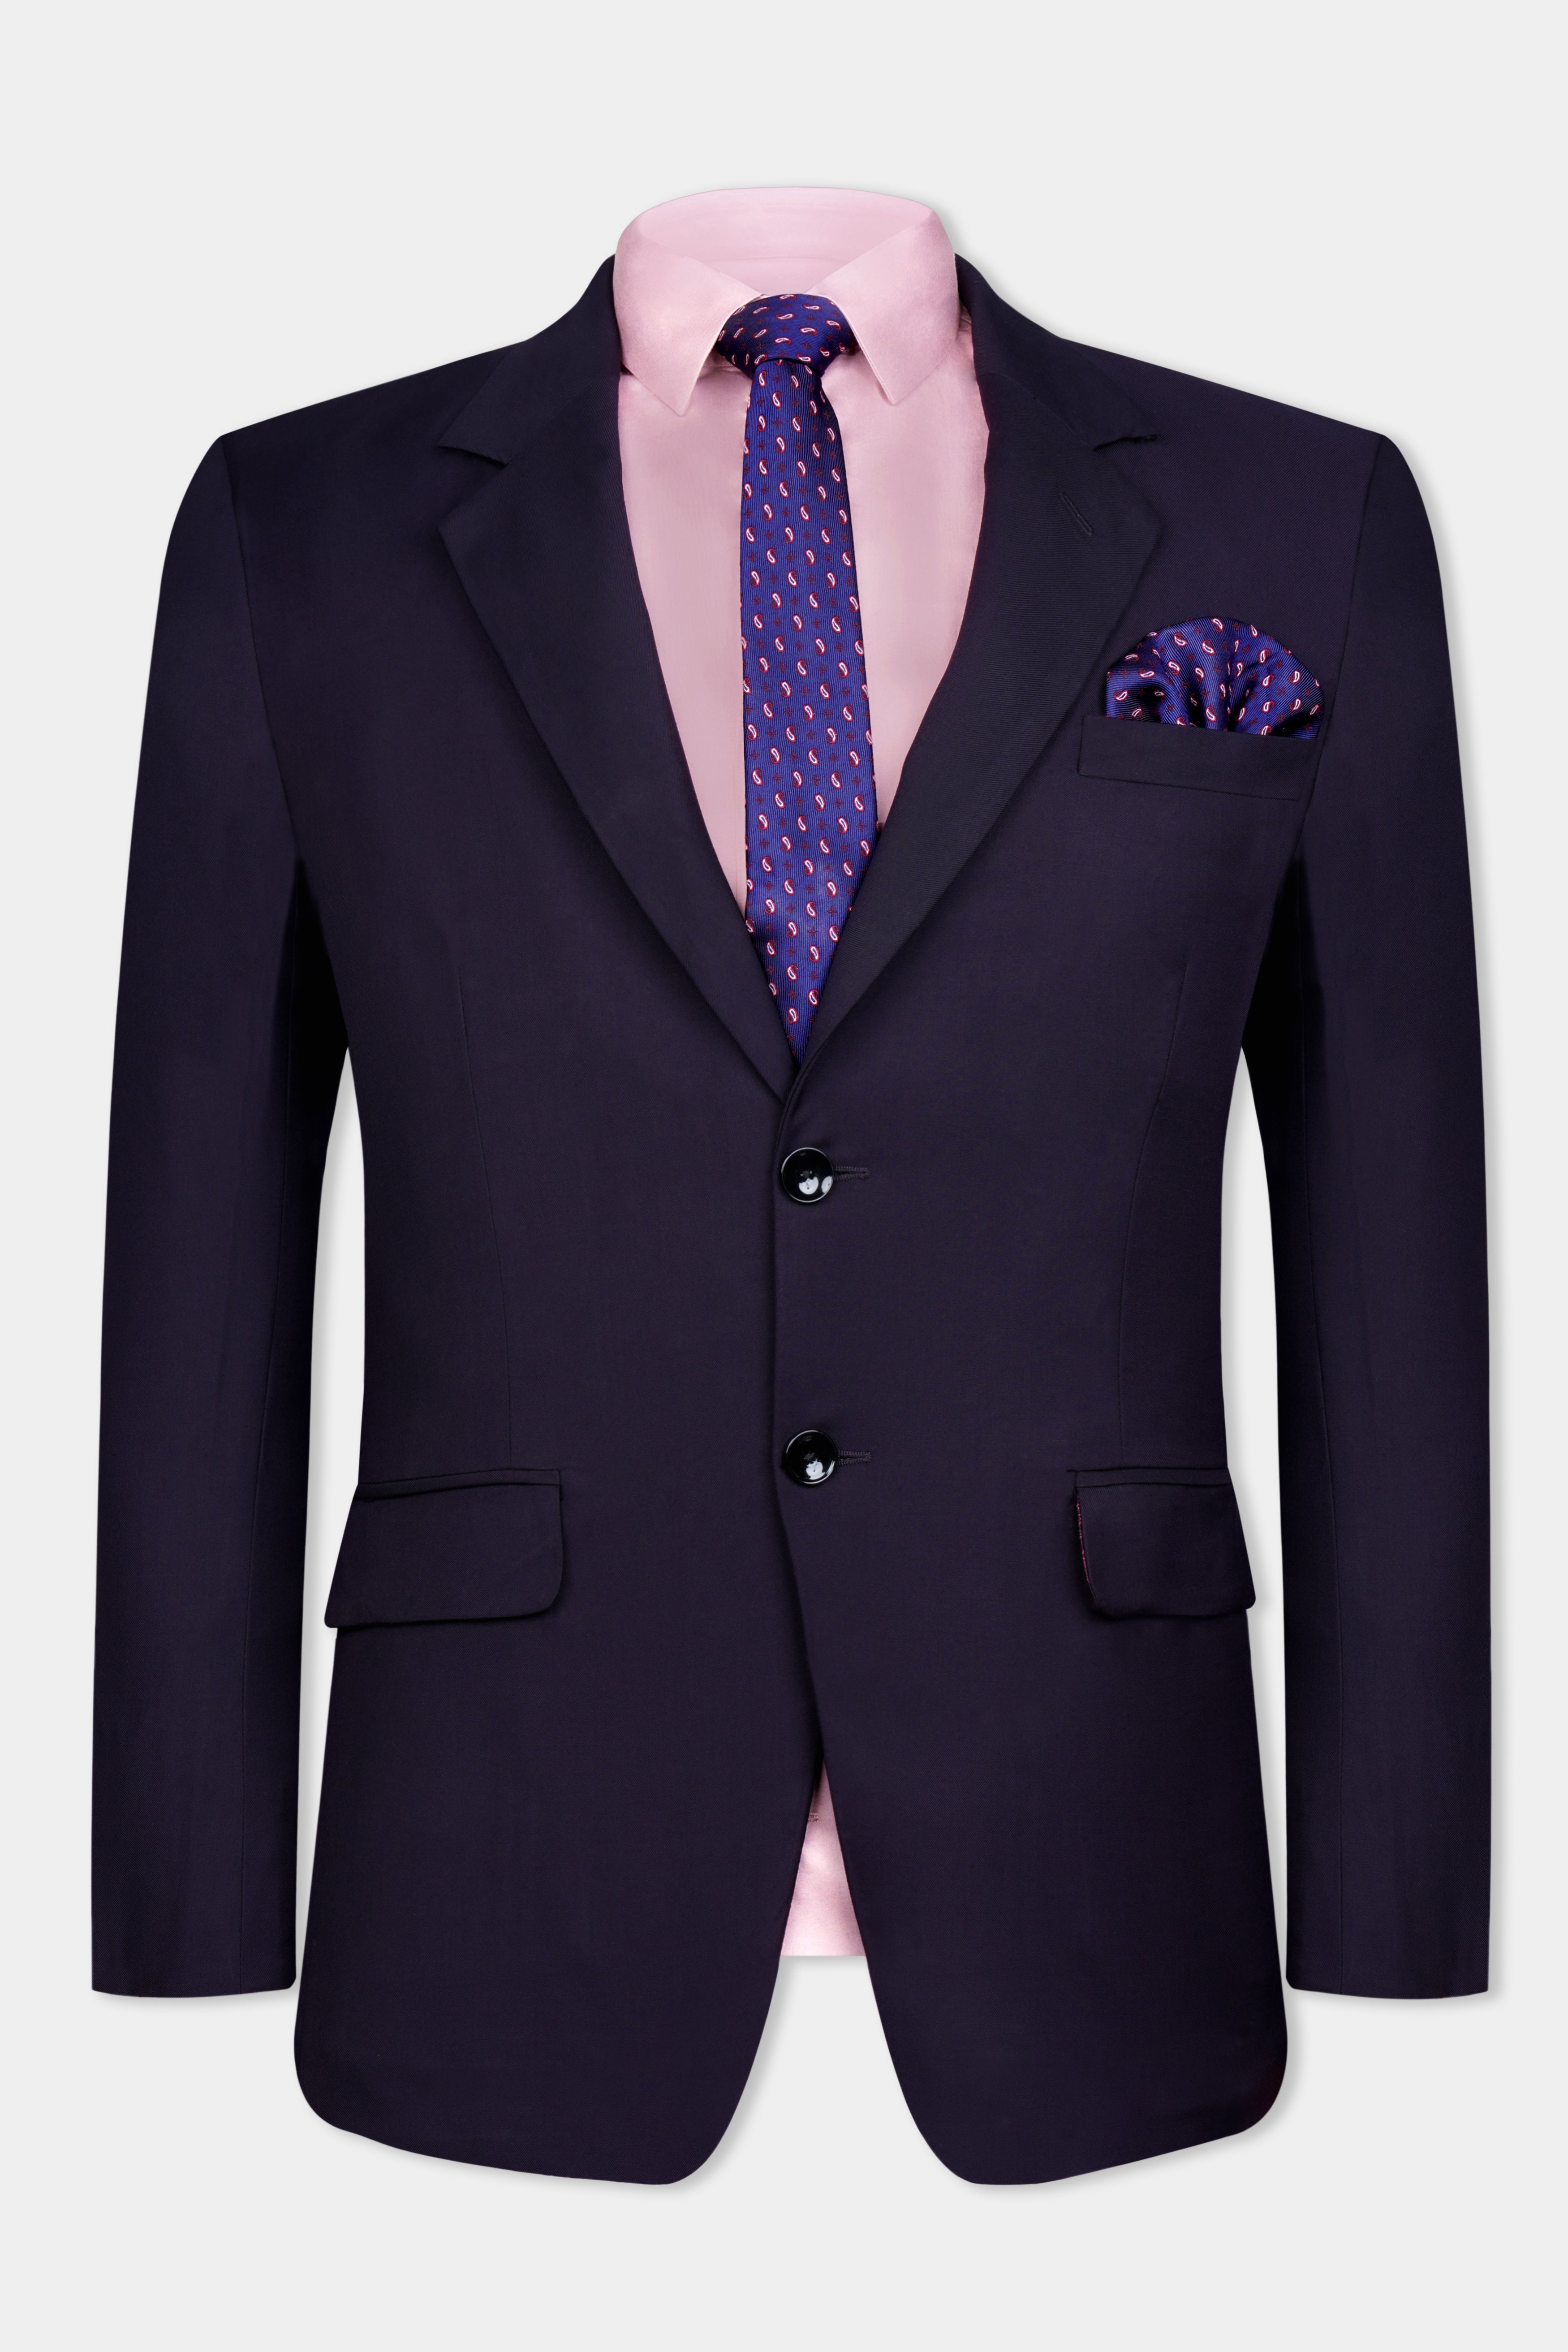 Bluish Wool Rich Single-breasted Suit ST3029-SB-36, ST3029-SB-38, ST3029-SB-40, ST3029-SB-42, ST3029-SB-44, ST3029-SB-46, ST3029-SB-48, ST3029-SB-50, ST3029-SB-52, ST3029-SB-54, ST3029-SB-56, ST3029-SB-58, ST3029-SB-60